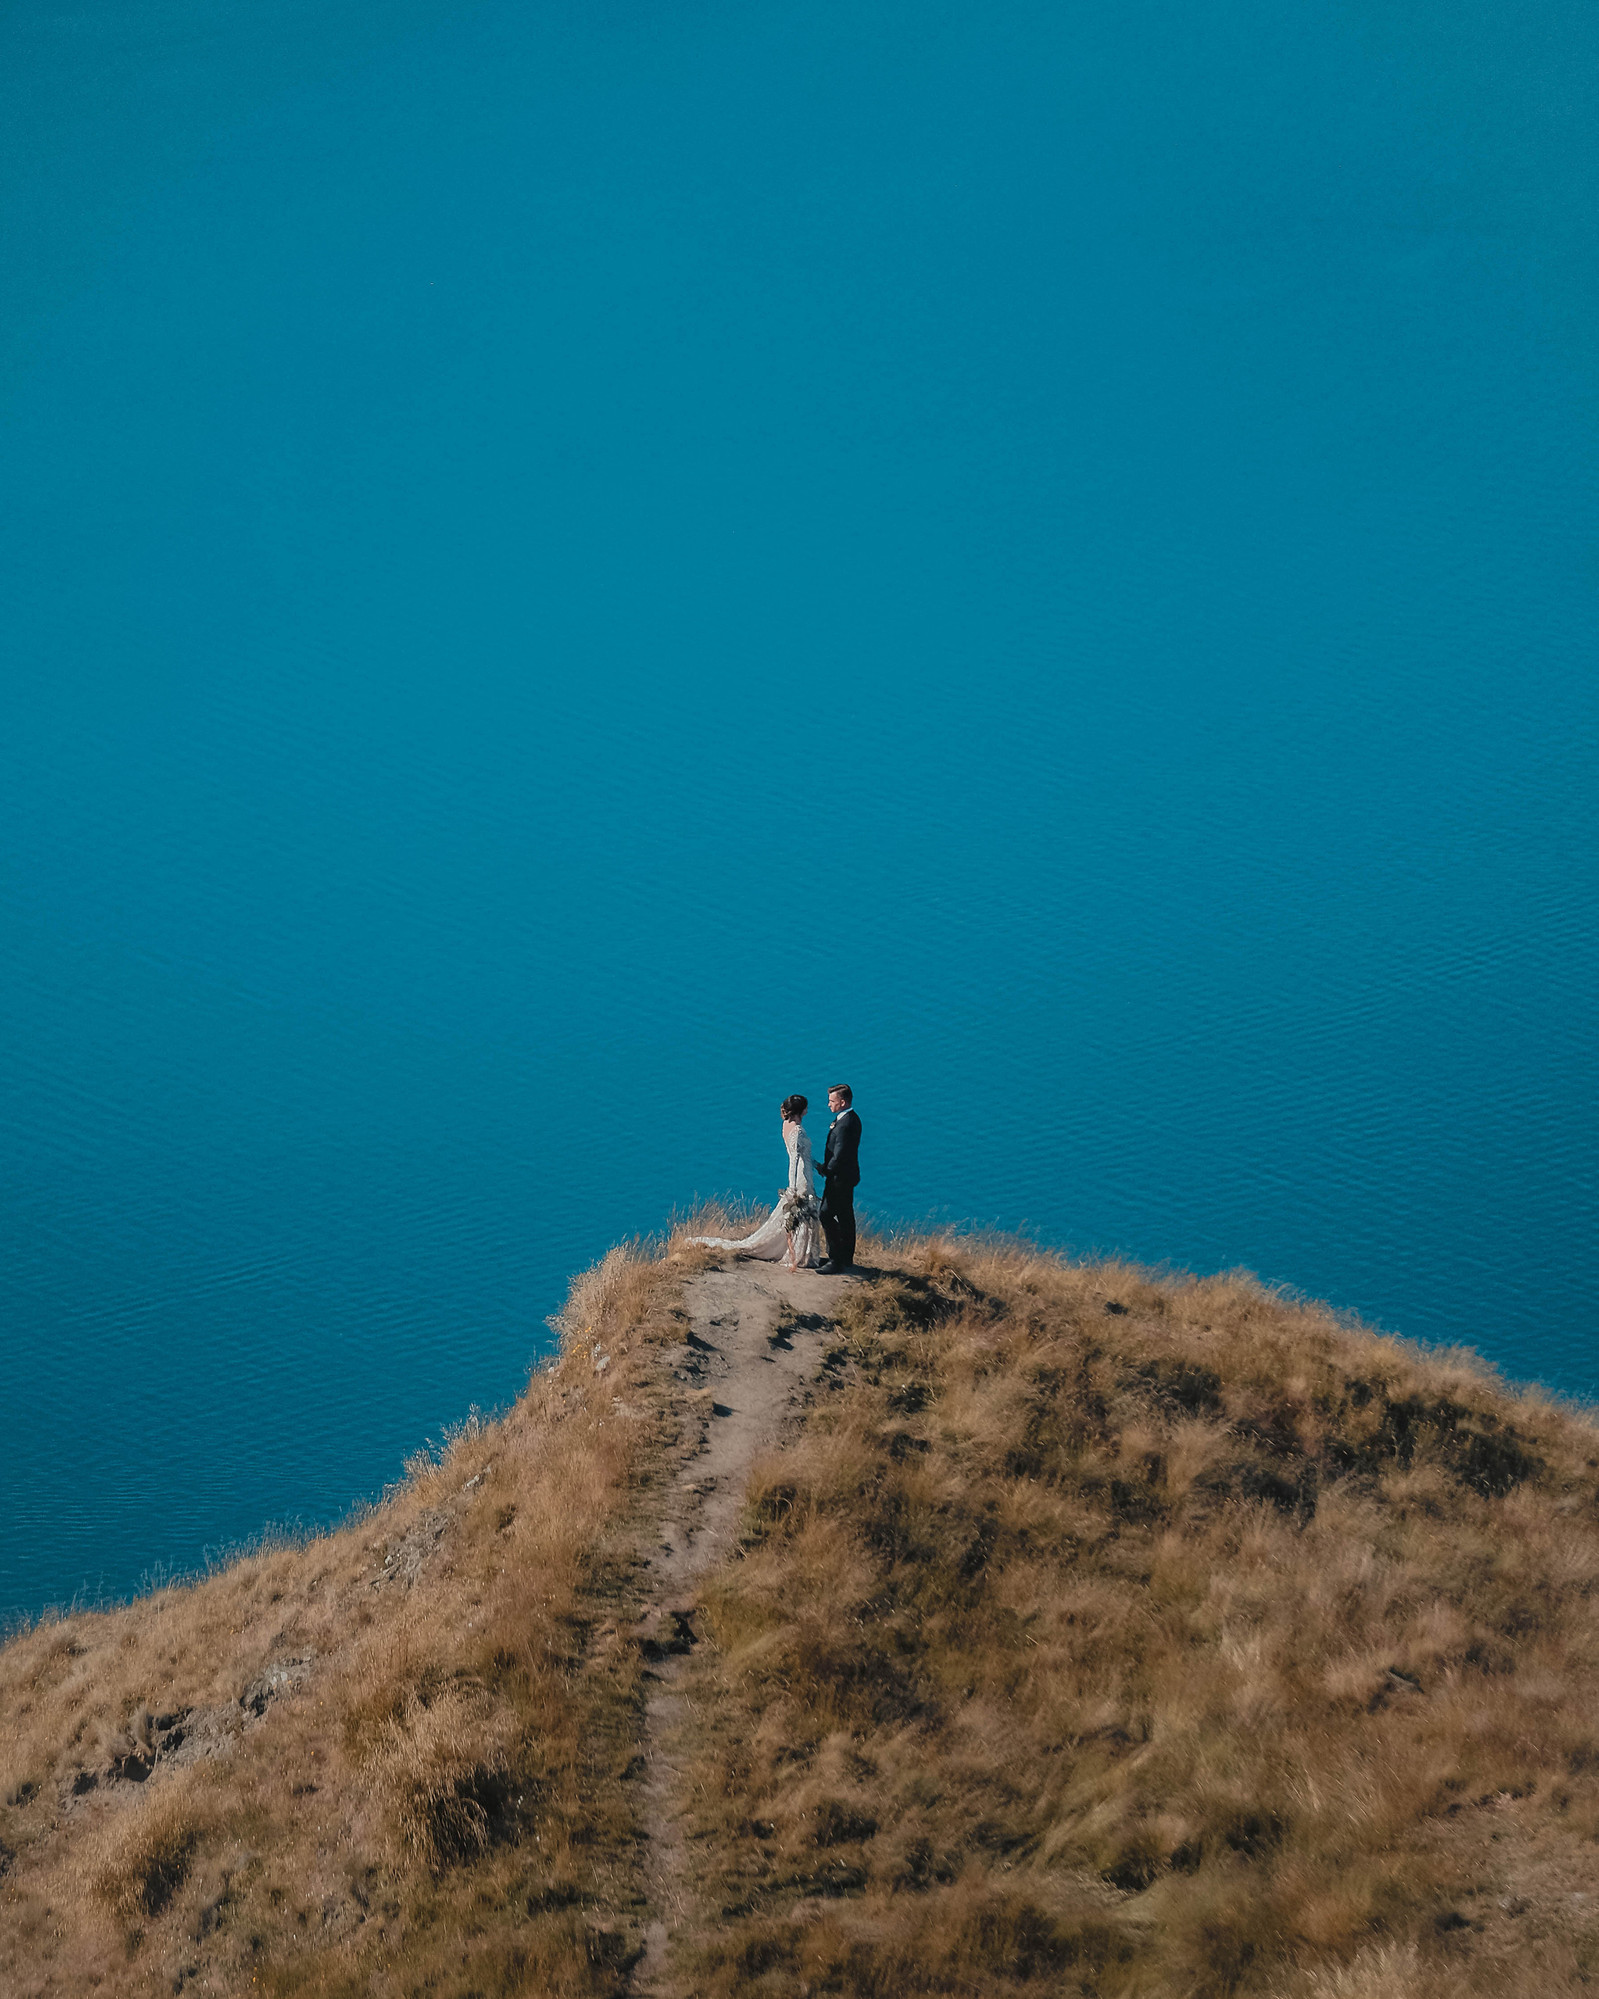 A newly wed couple stands alone on the edge of a cliff, shortly after the elopement ceremony in Wanaka, New Zealand